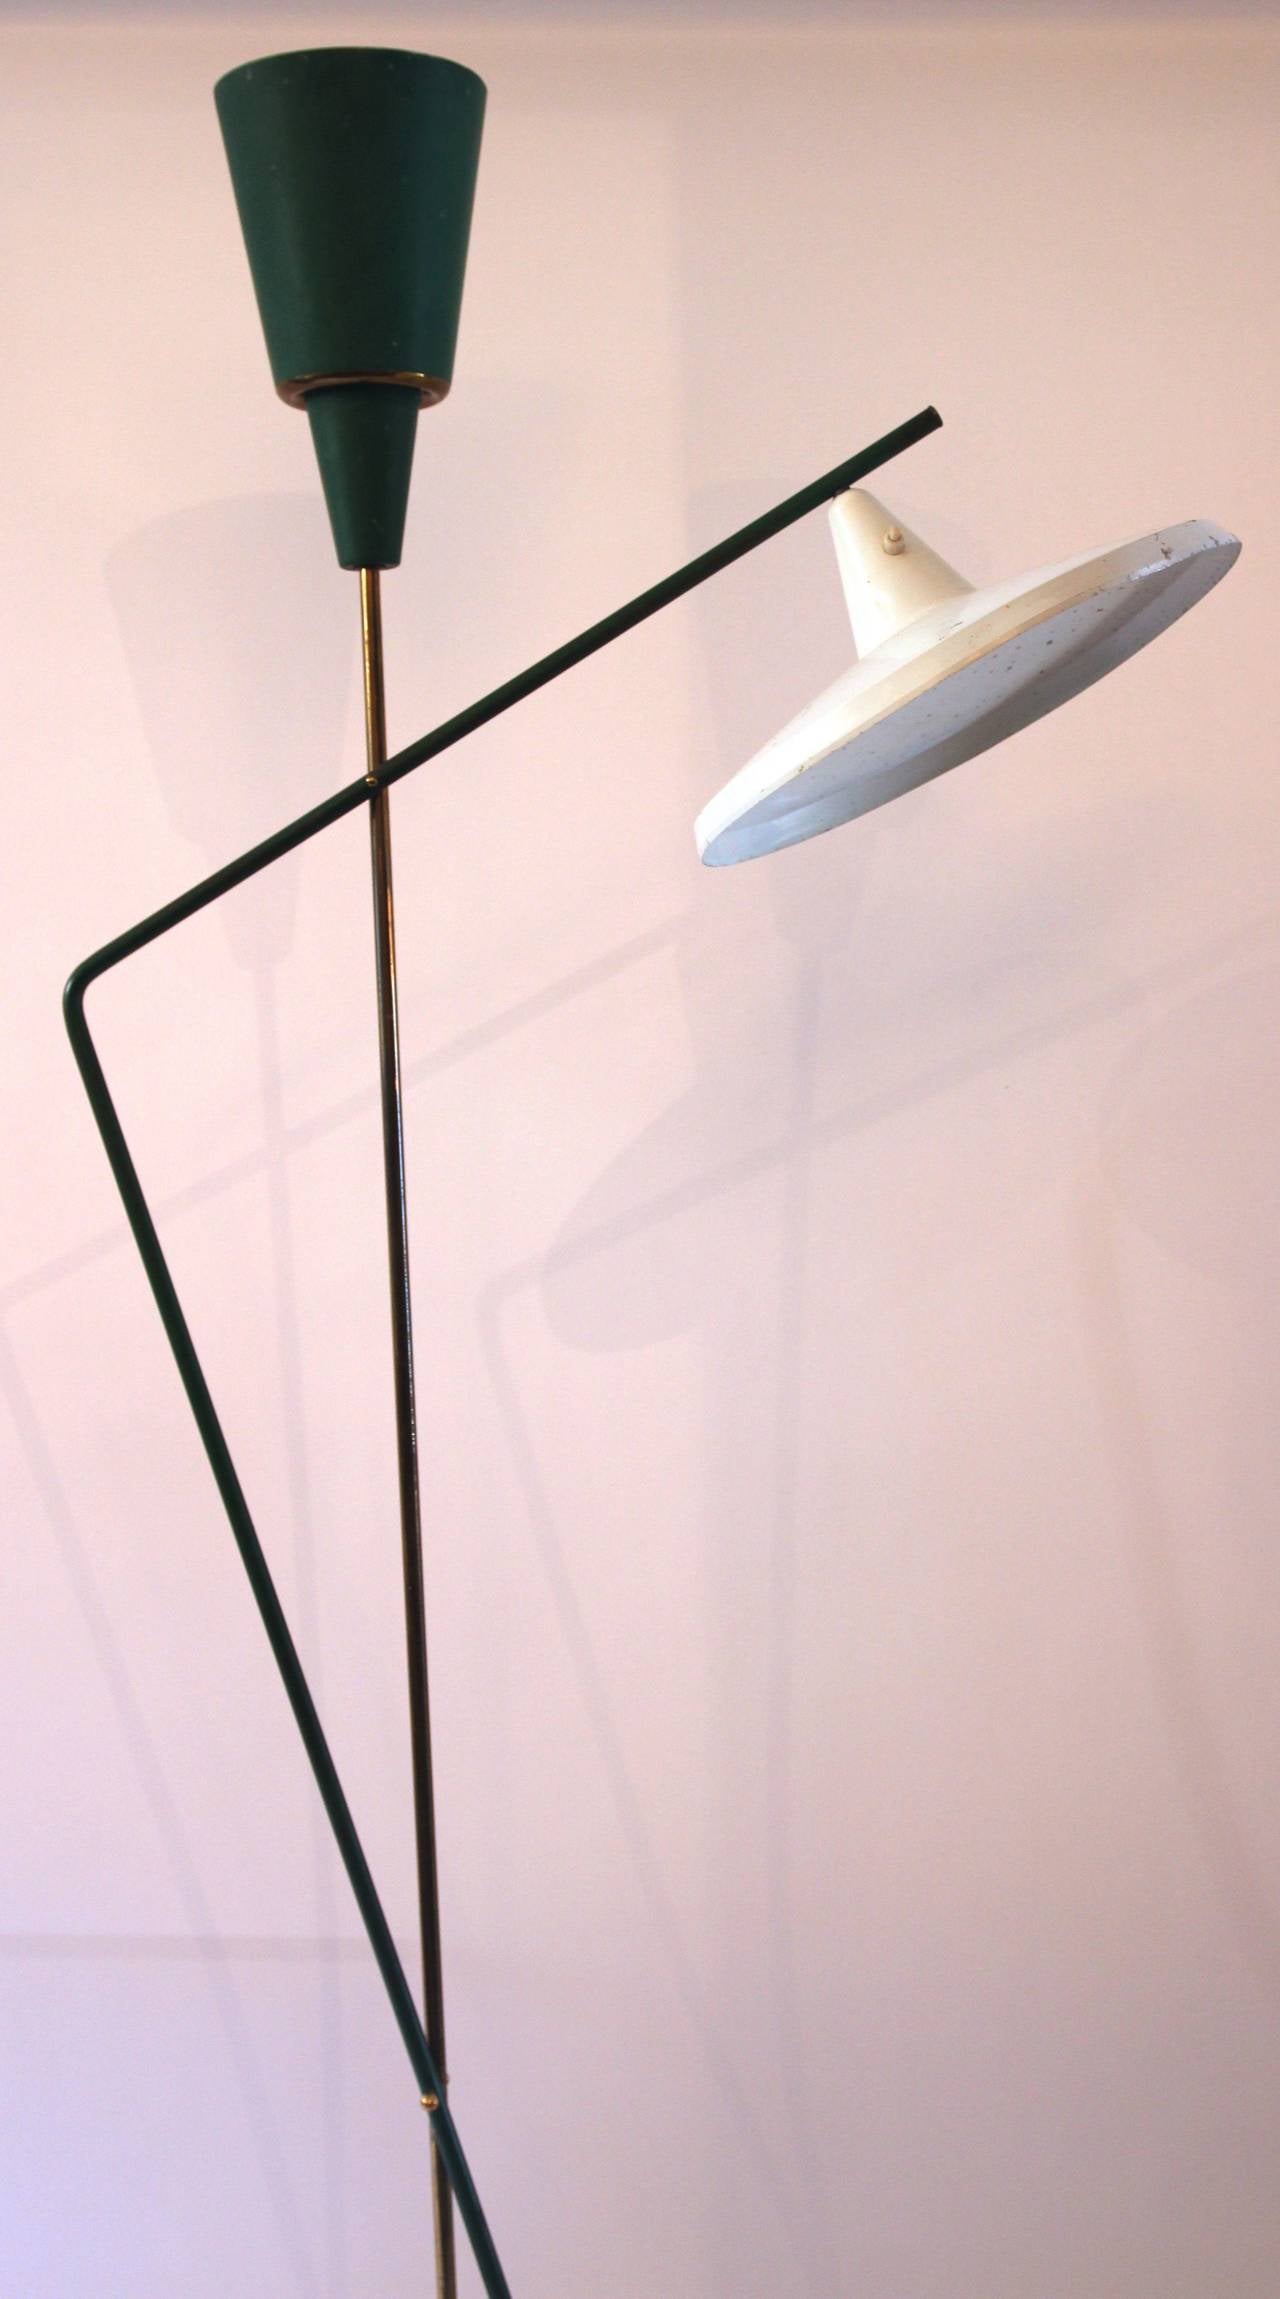 Floor lamp,
Marble, lacquered metal, gilded brass,
Circa 1950, Italy, minor wear consistent with age and use.
Height: 180 cm, width: 80 cm, diameter: 40 cm.